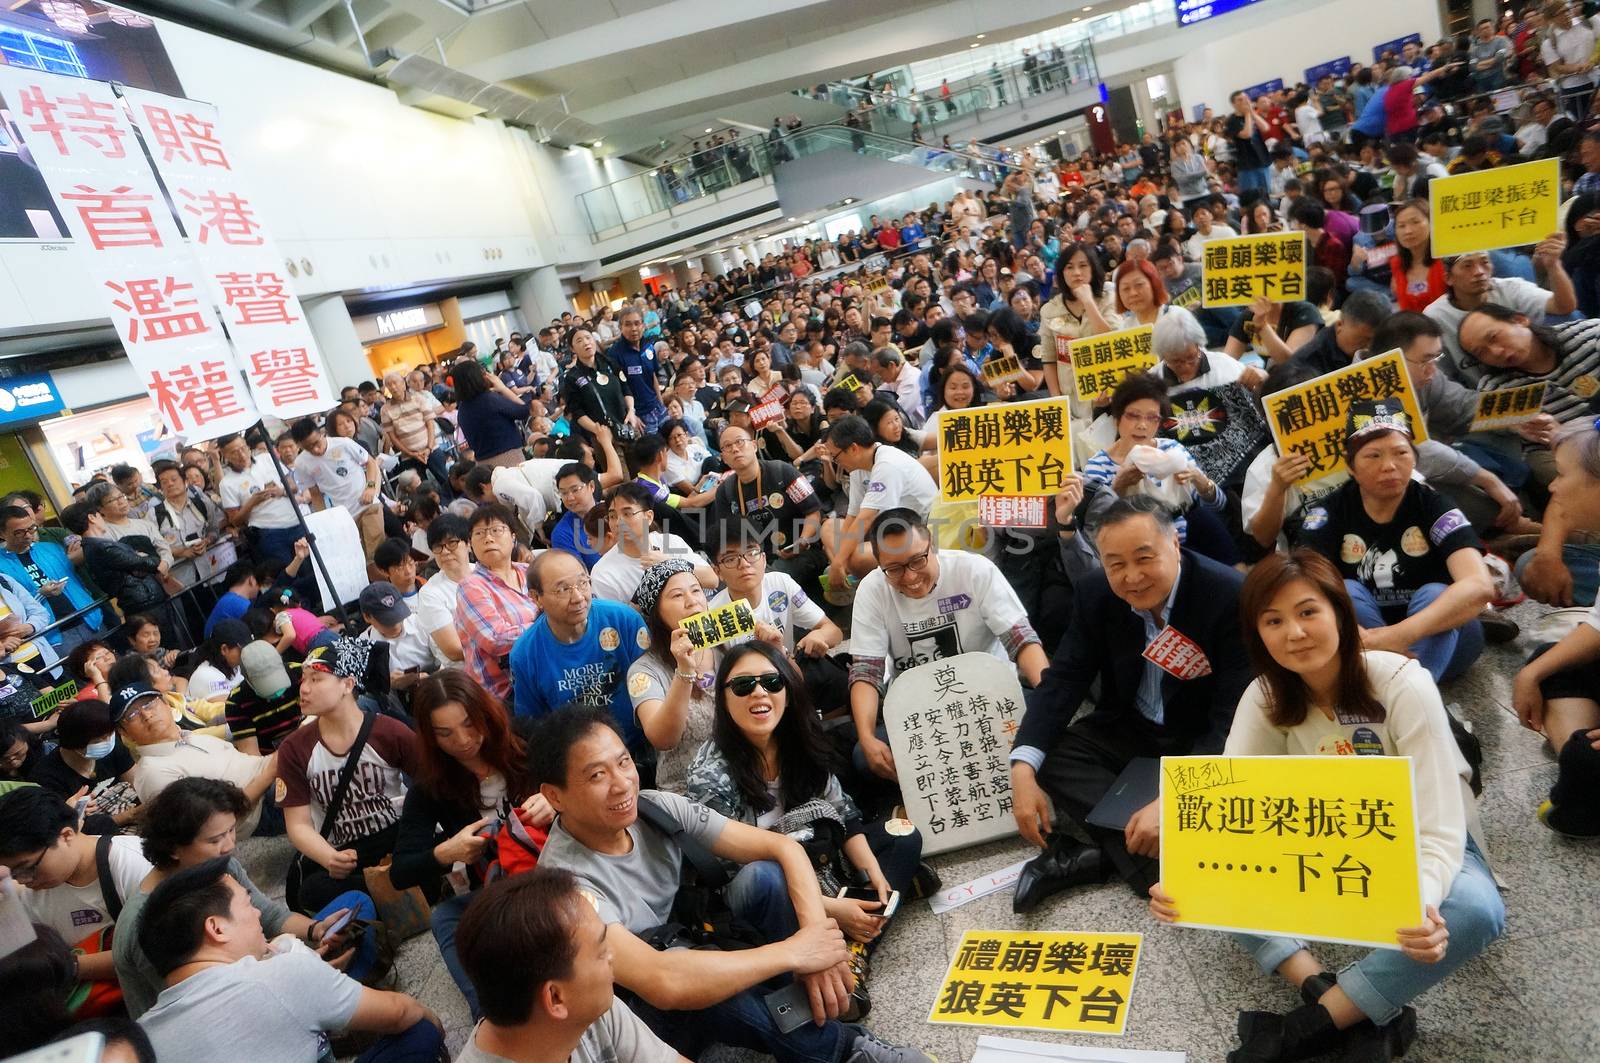 HONG KONG: Protesters hold signs during a protest organised by the Hong Kong Cabin Crew Federation at Hong Kong International Airport on April 17, 2016.More than 1,000 people protested at the city's airport on April 17 over an incident that saw the daughter of the city's leader had her forgotten hand baggage delivered to her at the restricted airport area.